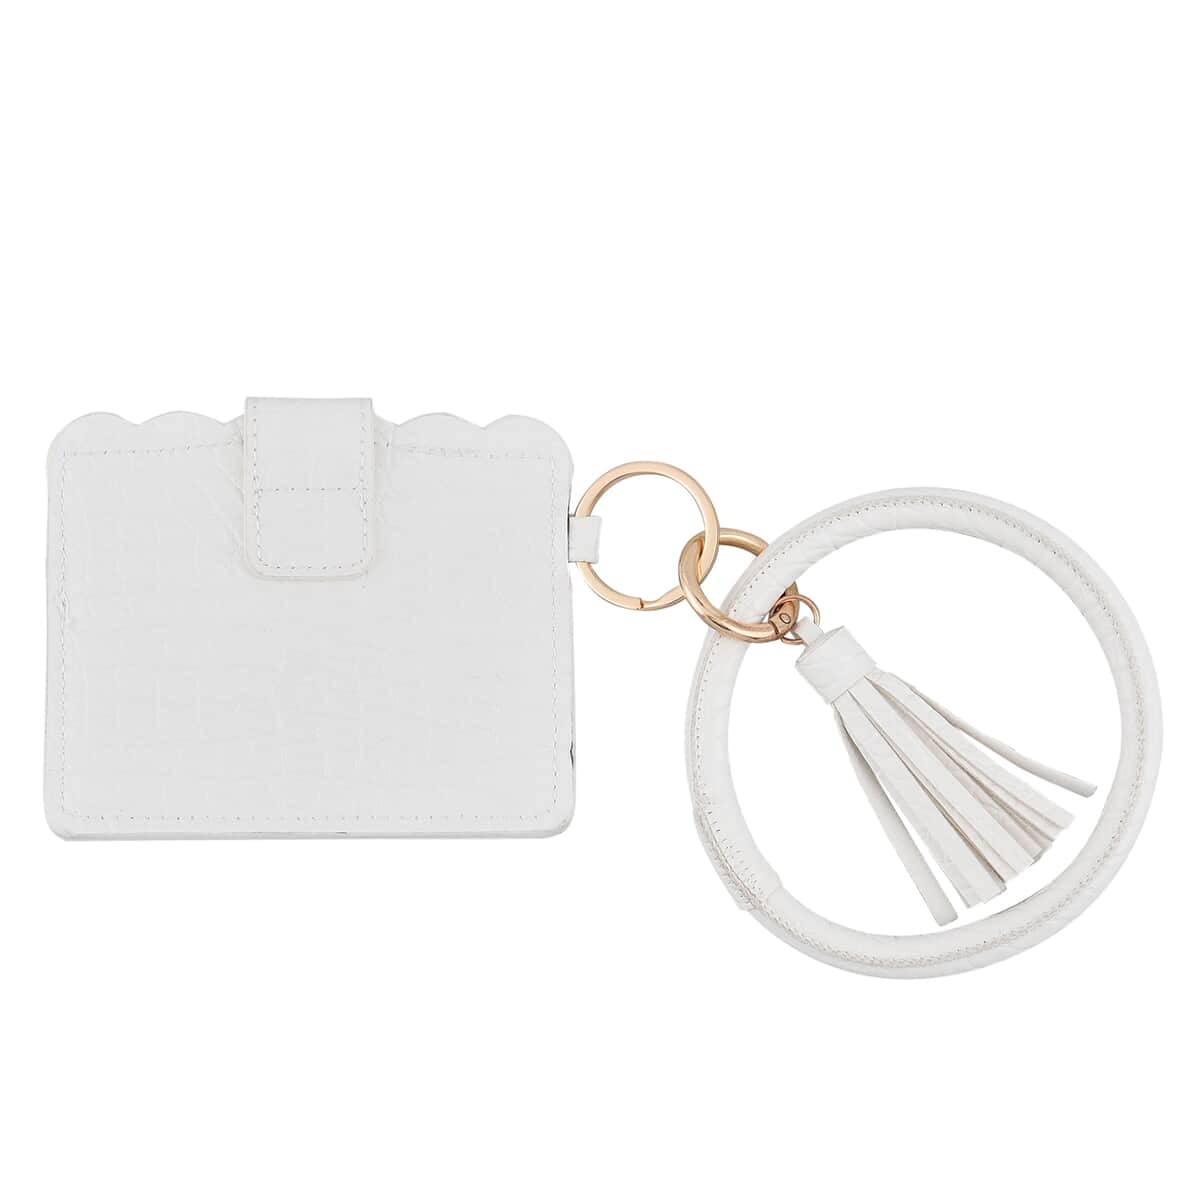 White Faux Leather Cardholder Bangle Key Ring with Tassels image number 1